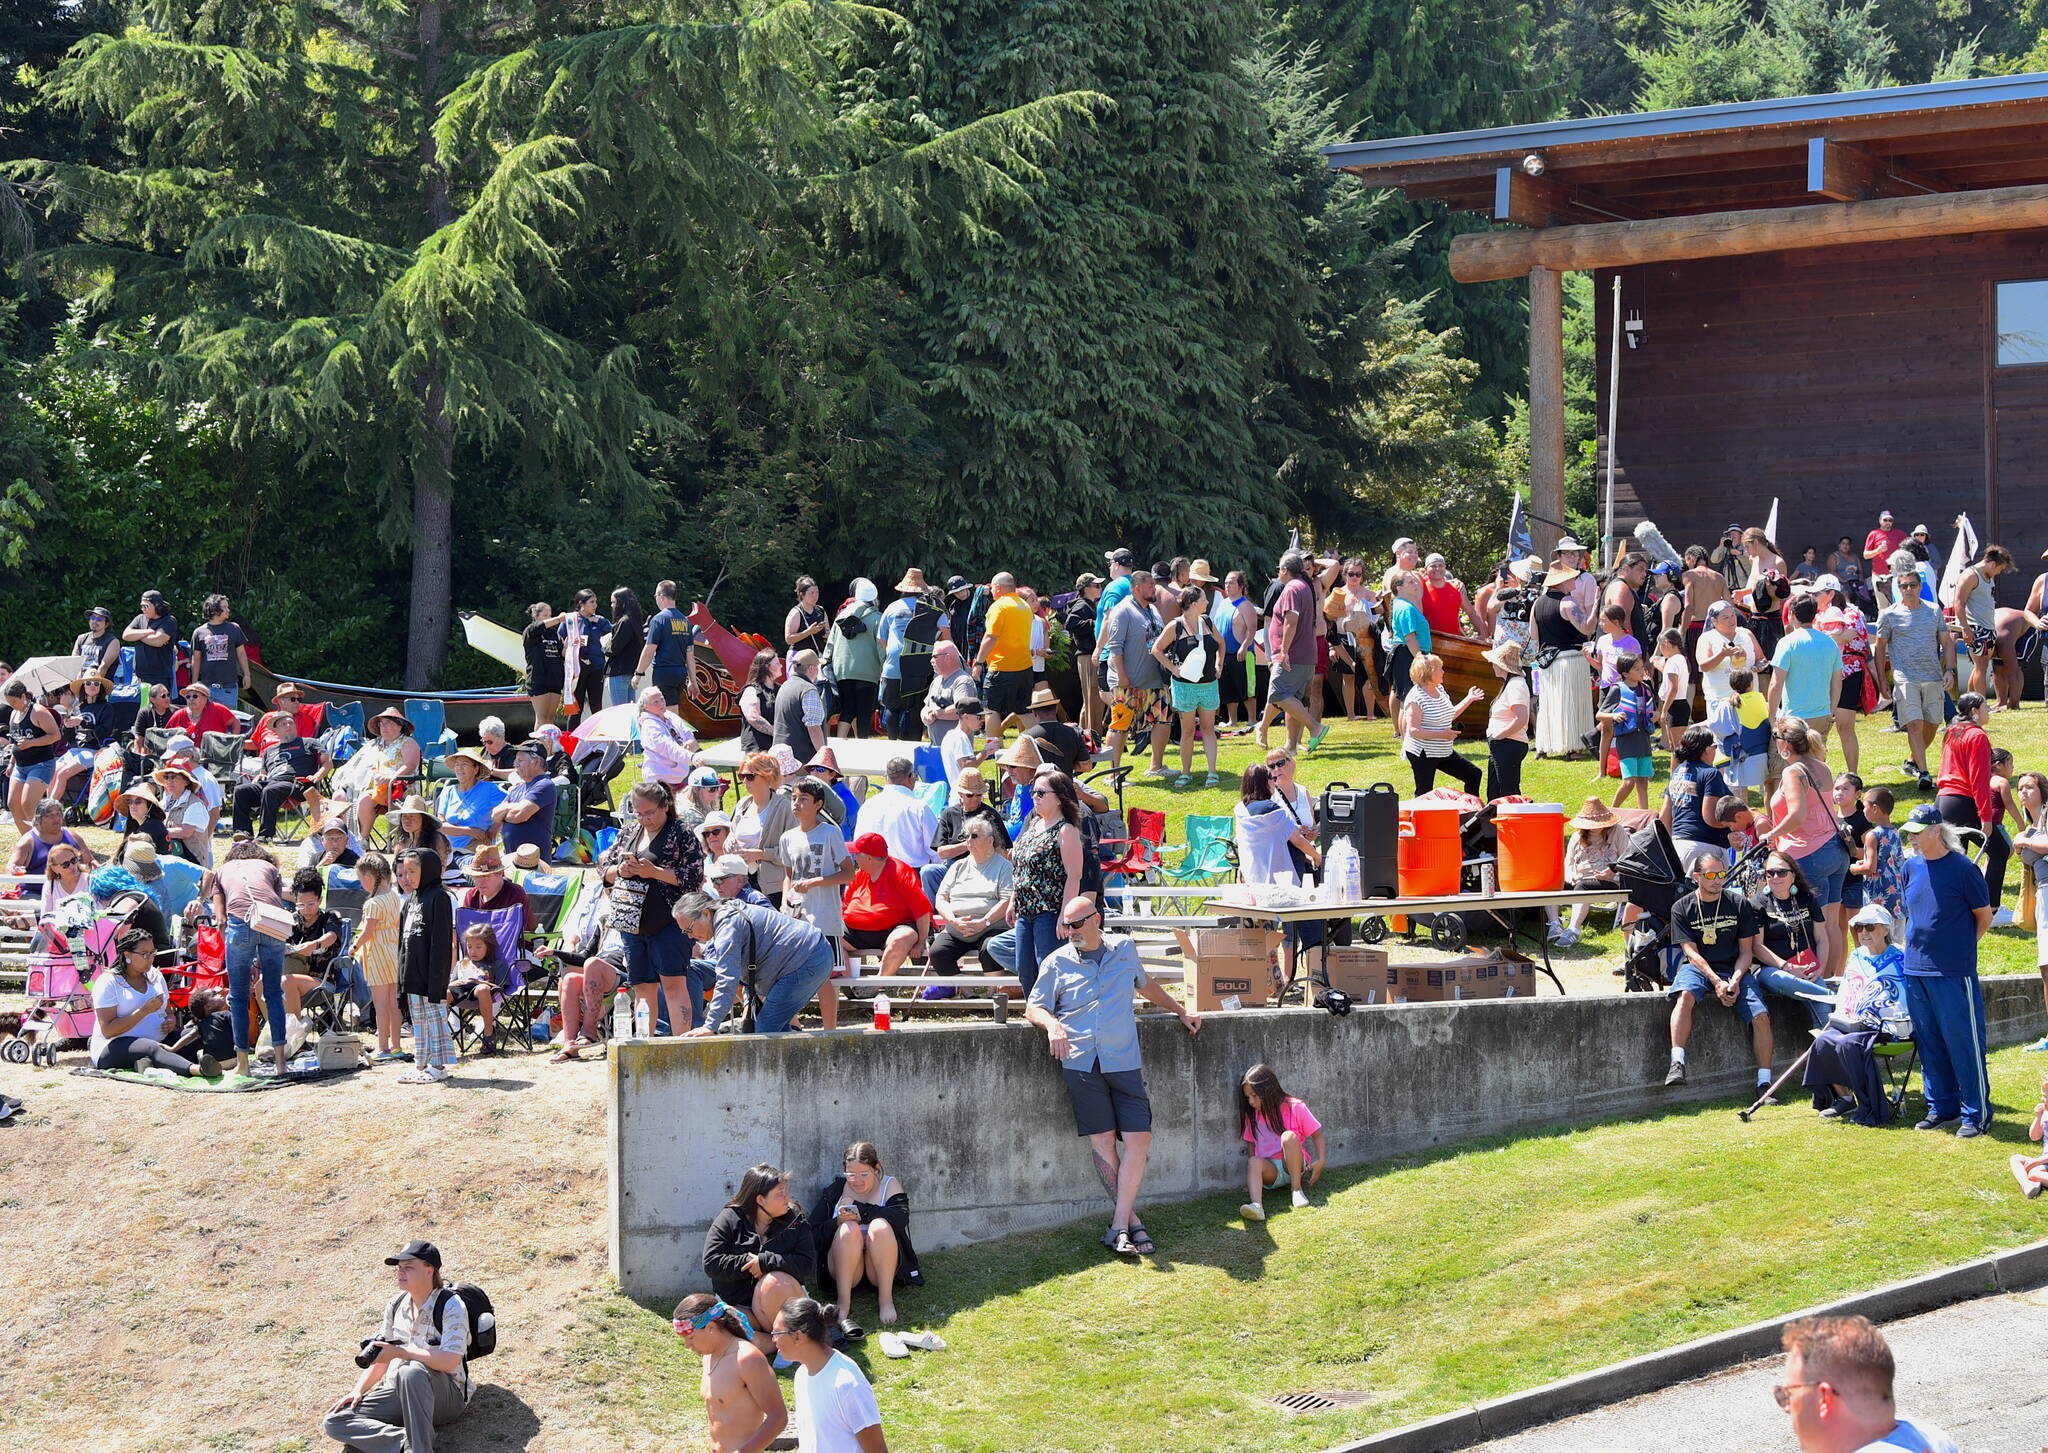 Hundreds of spectators watch canoes arrive at Suquamish on the sixth day of the Canoe Journey on the Salish Sea.